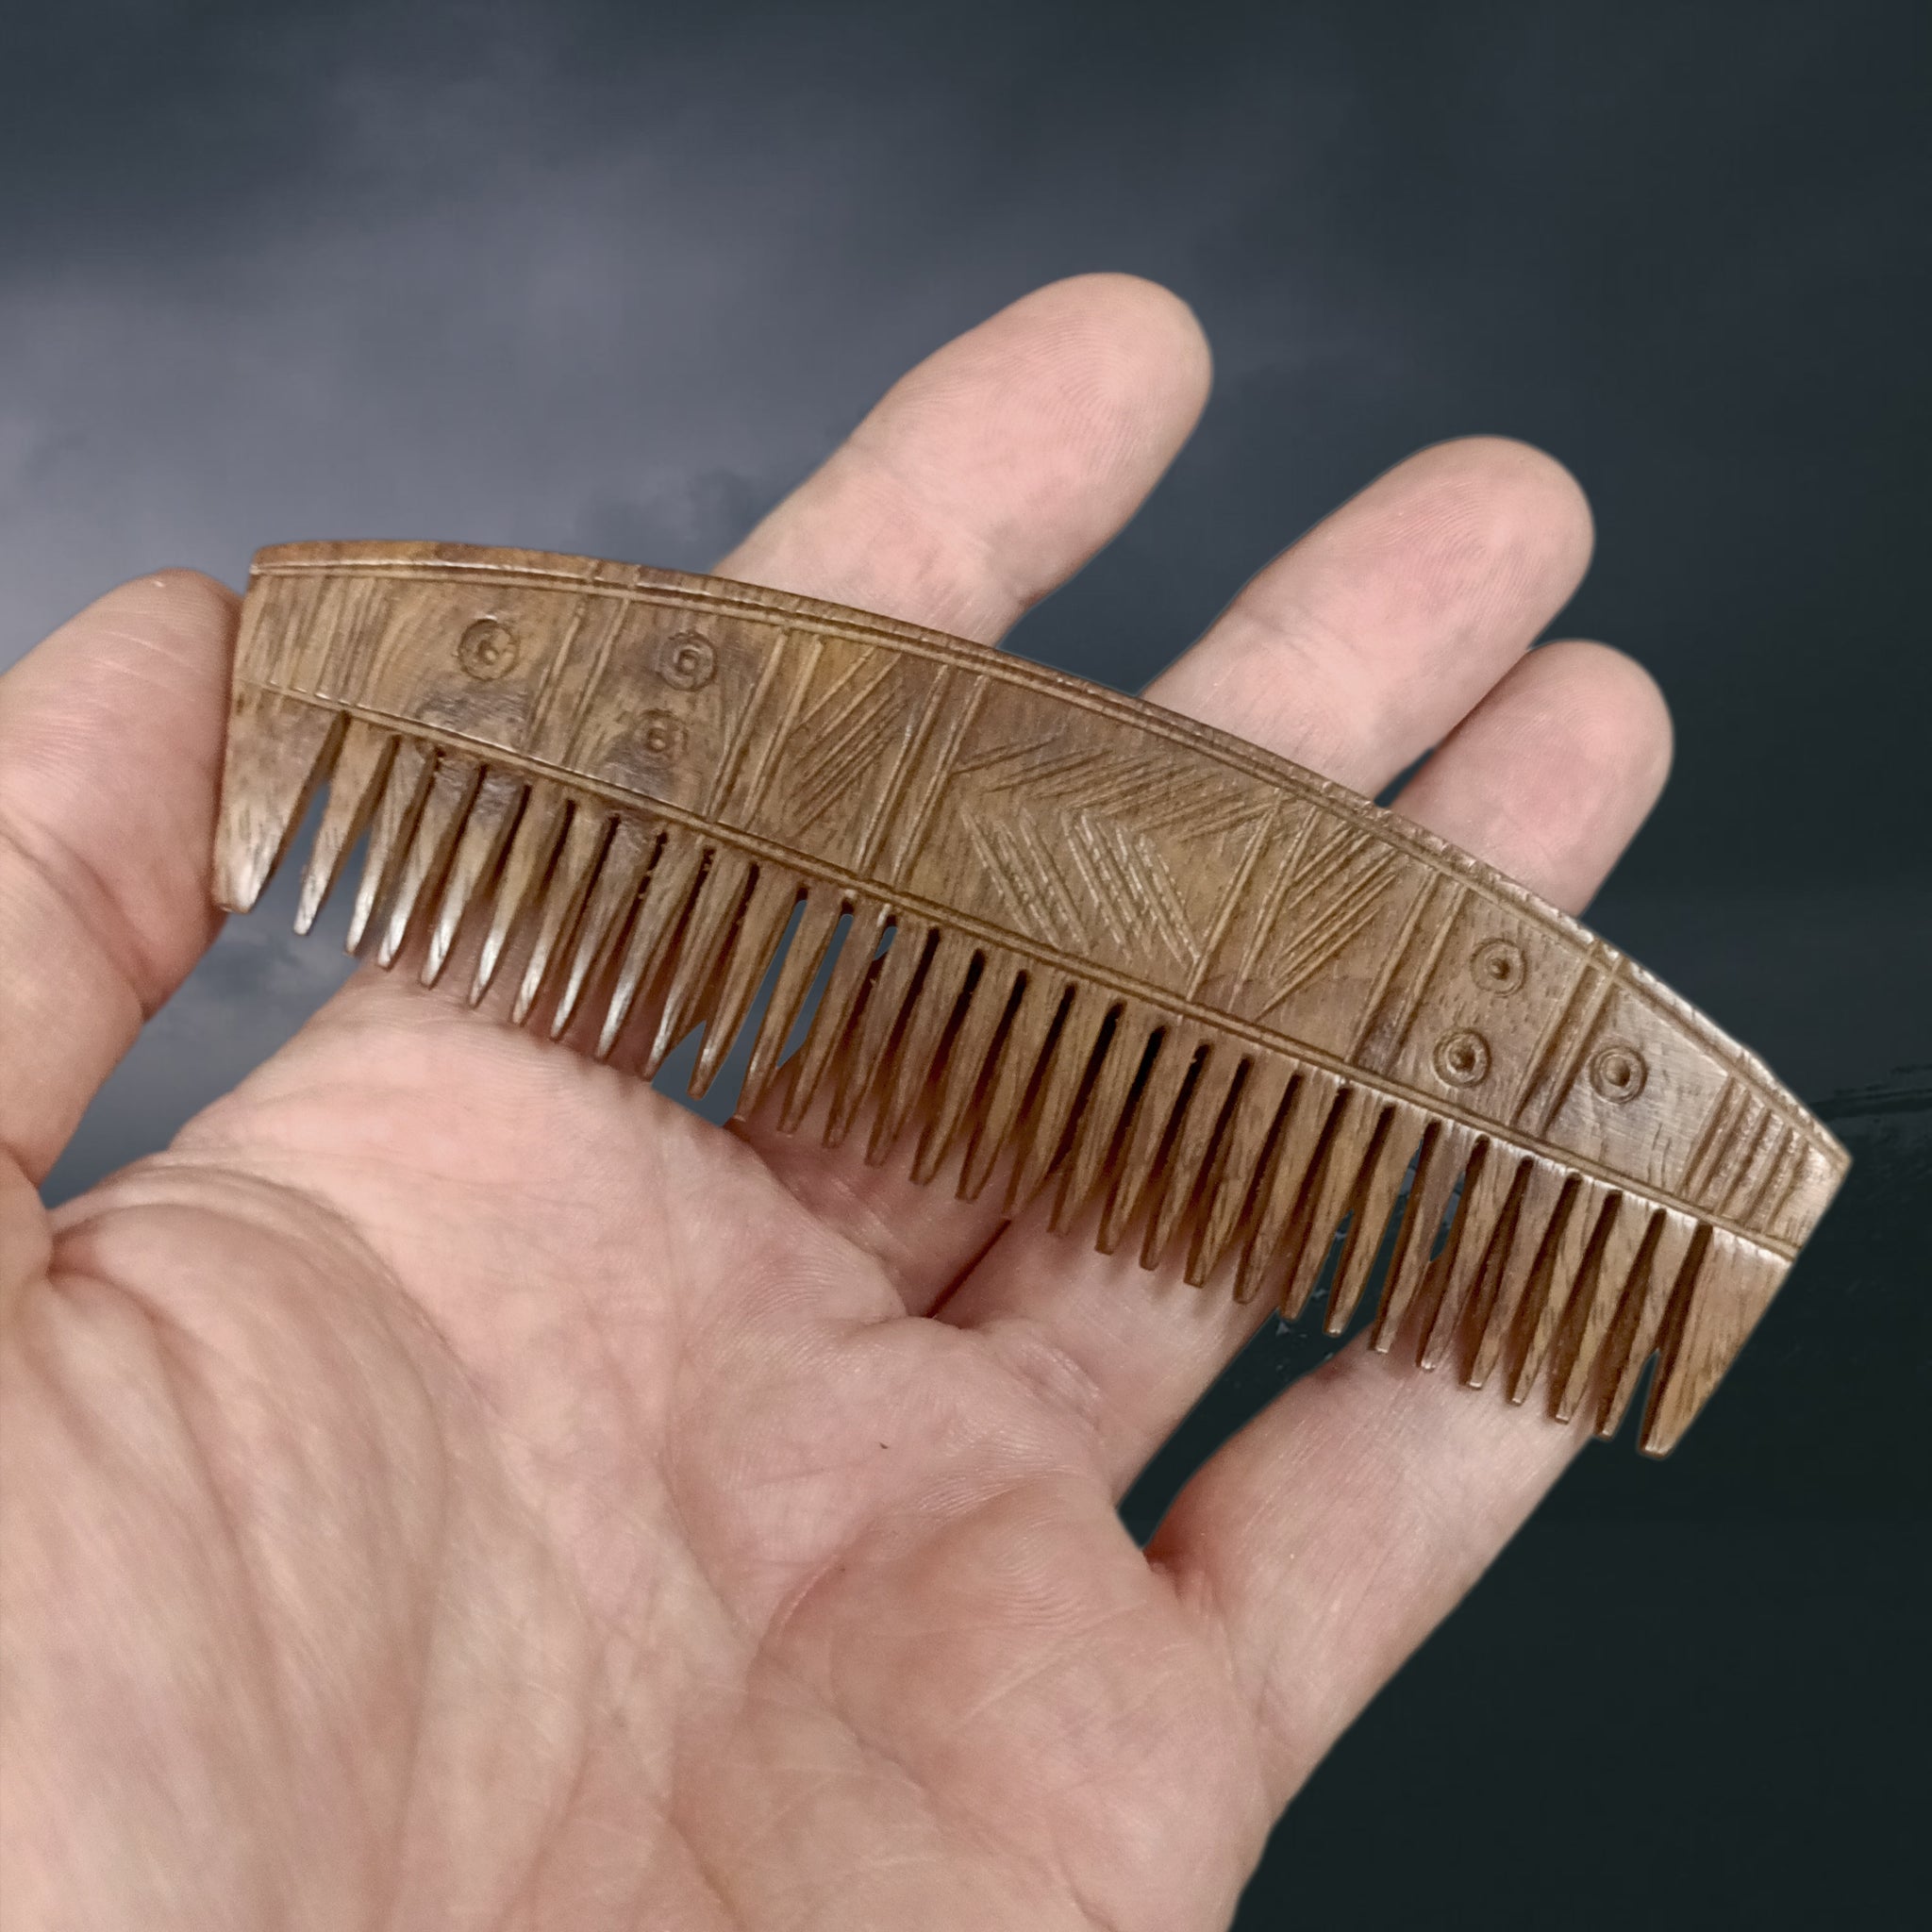 Decorated Wood Viking Comb with Curved Back on Hand